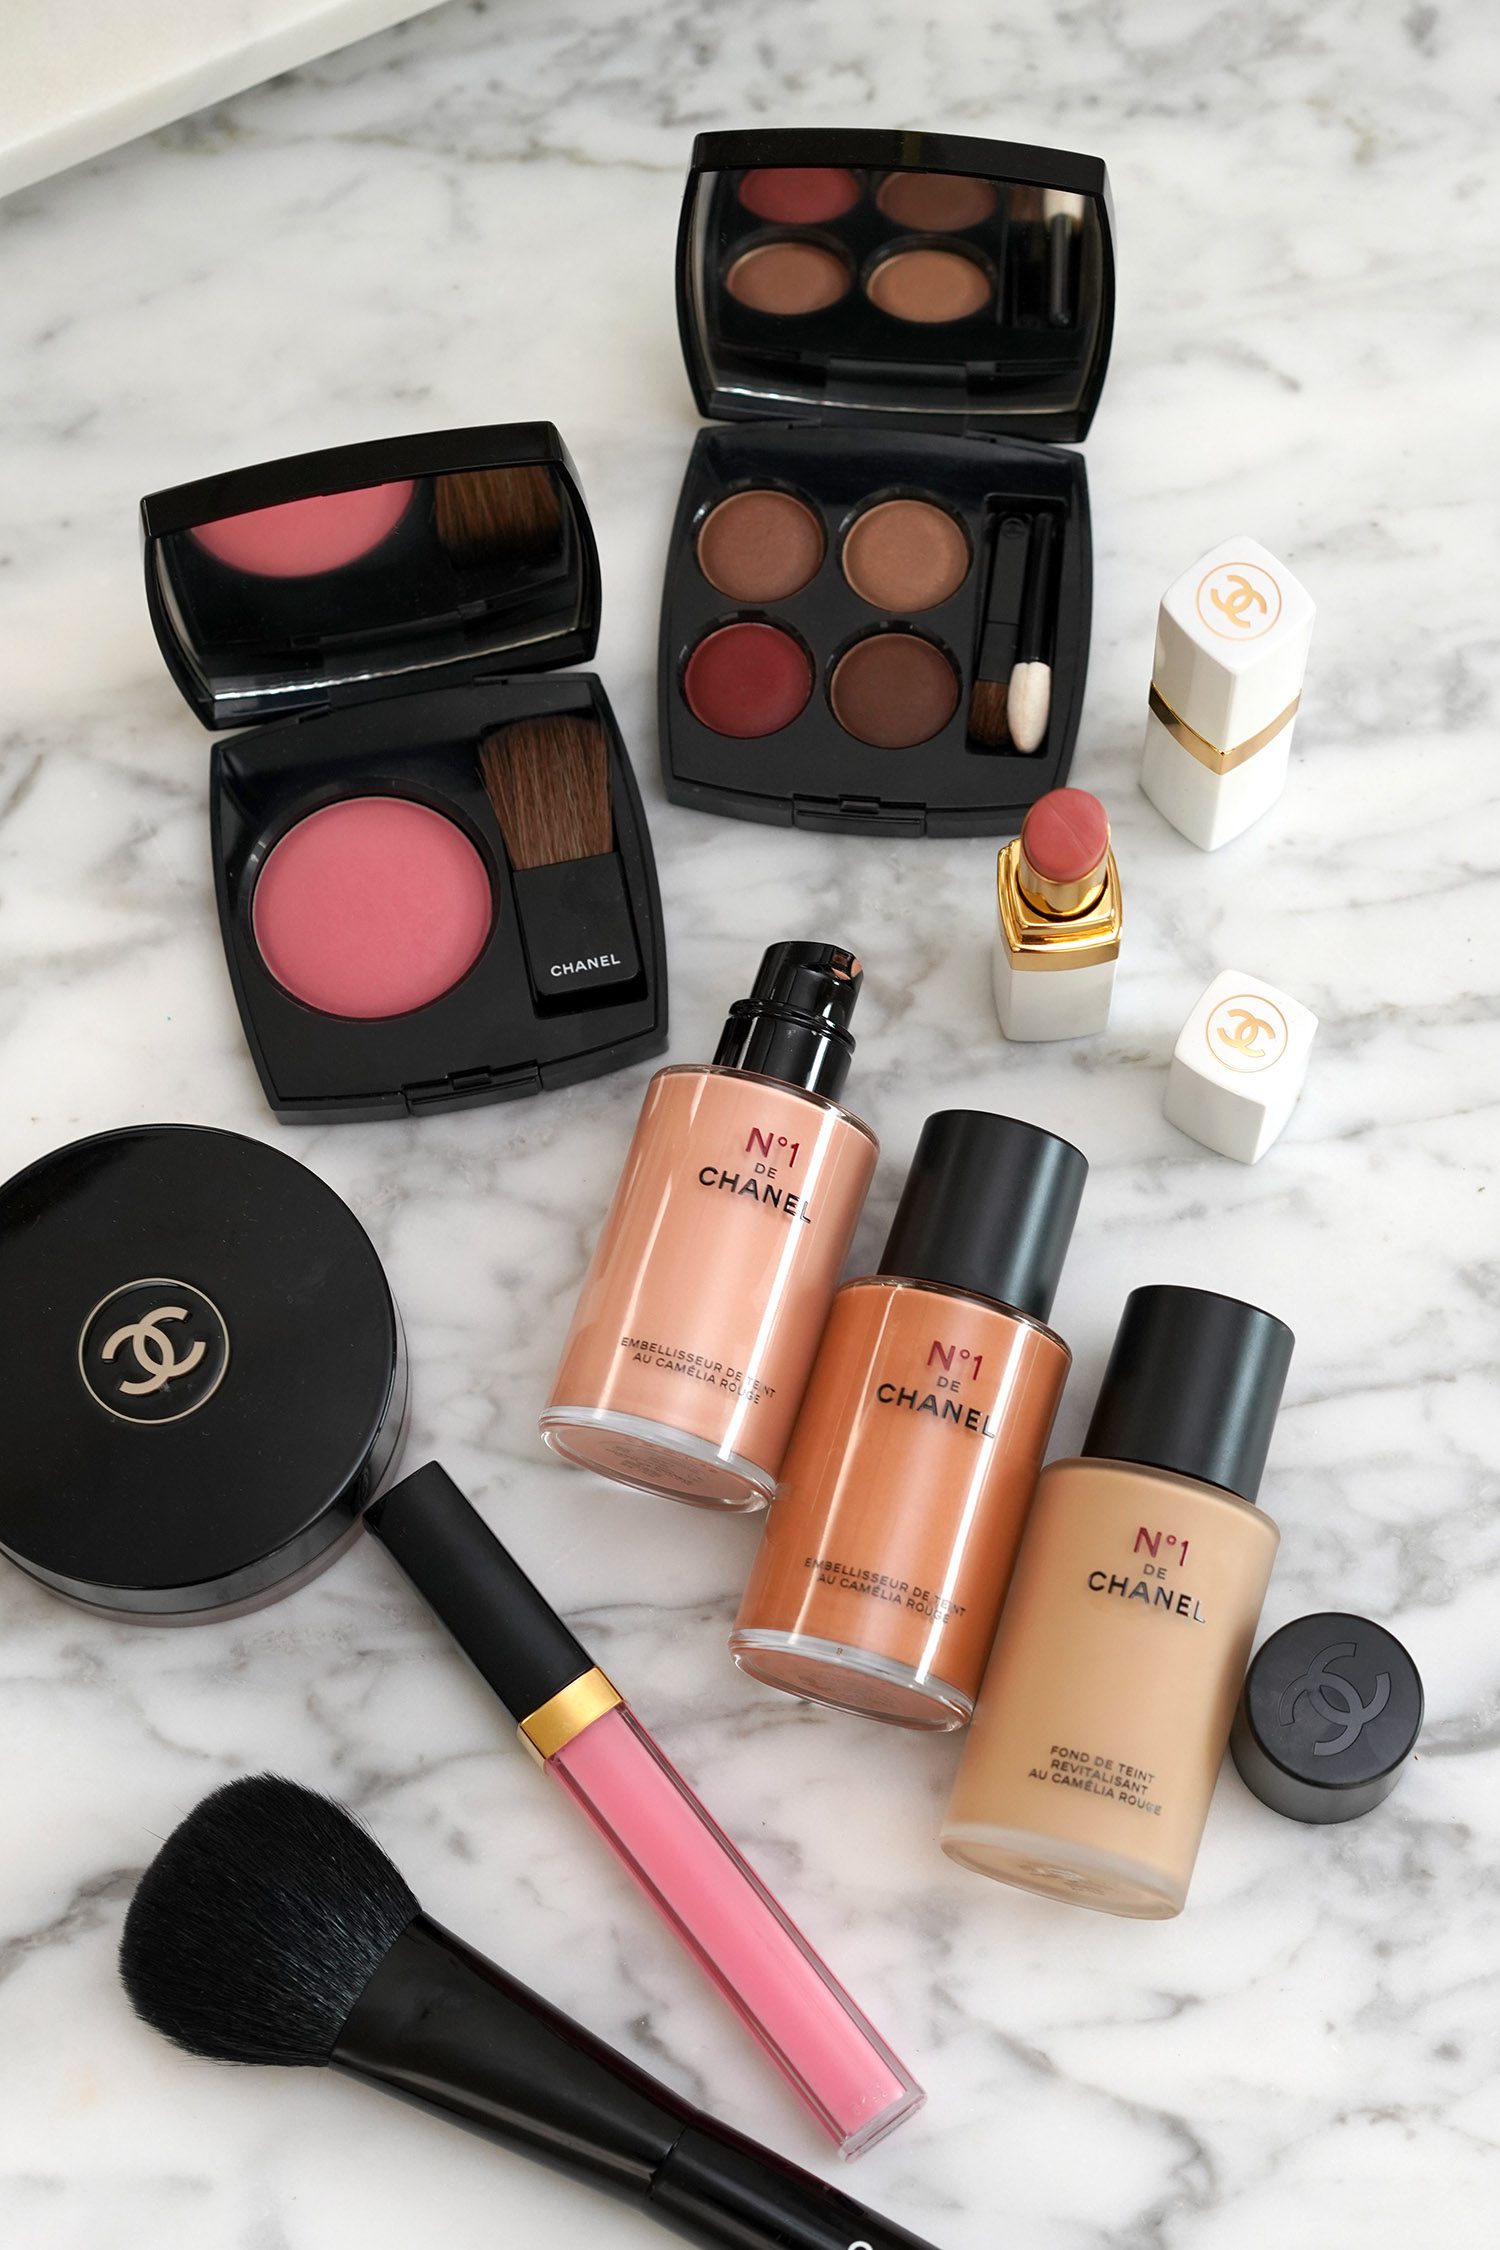 CHANEL Beauty Discoveries